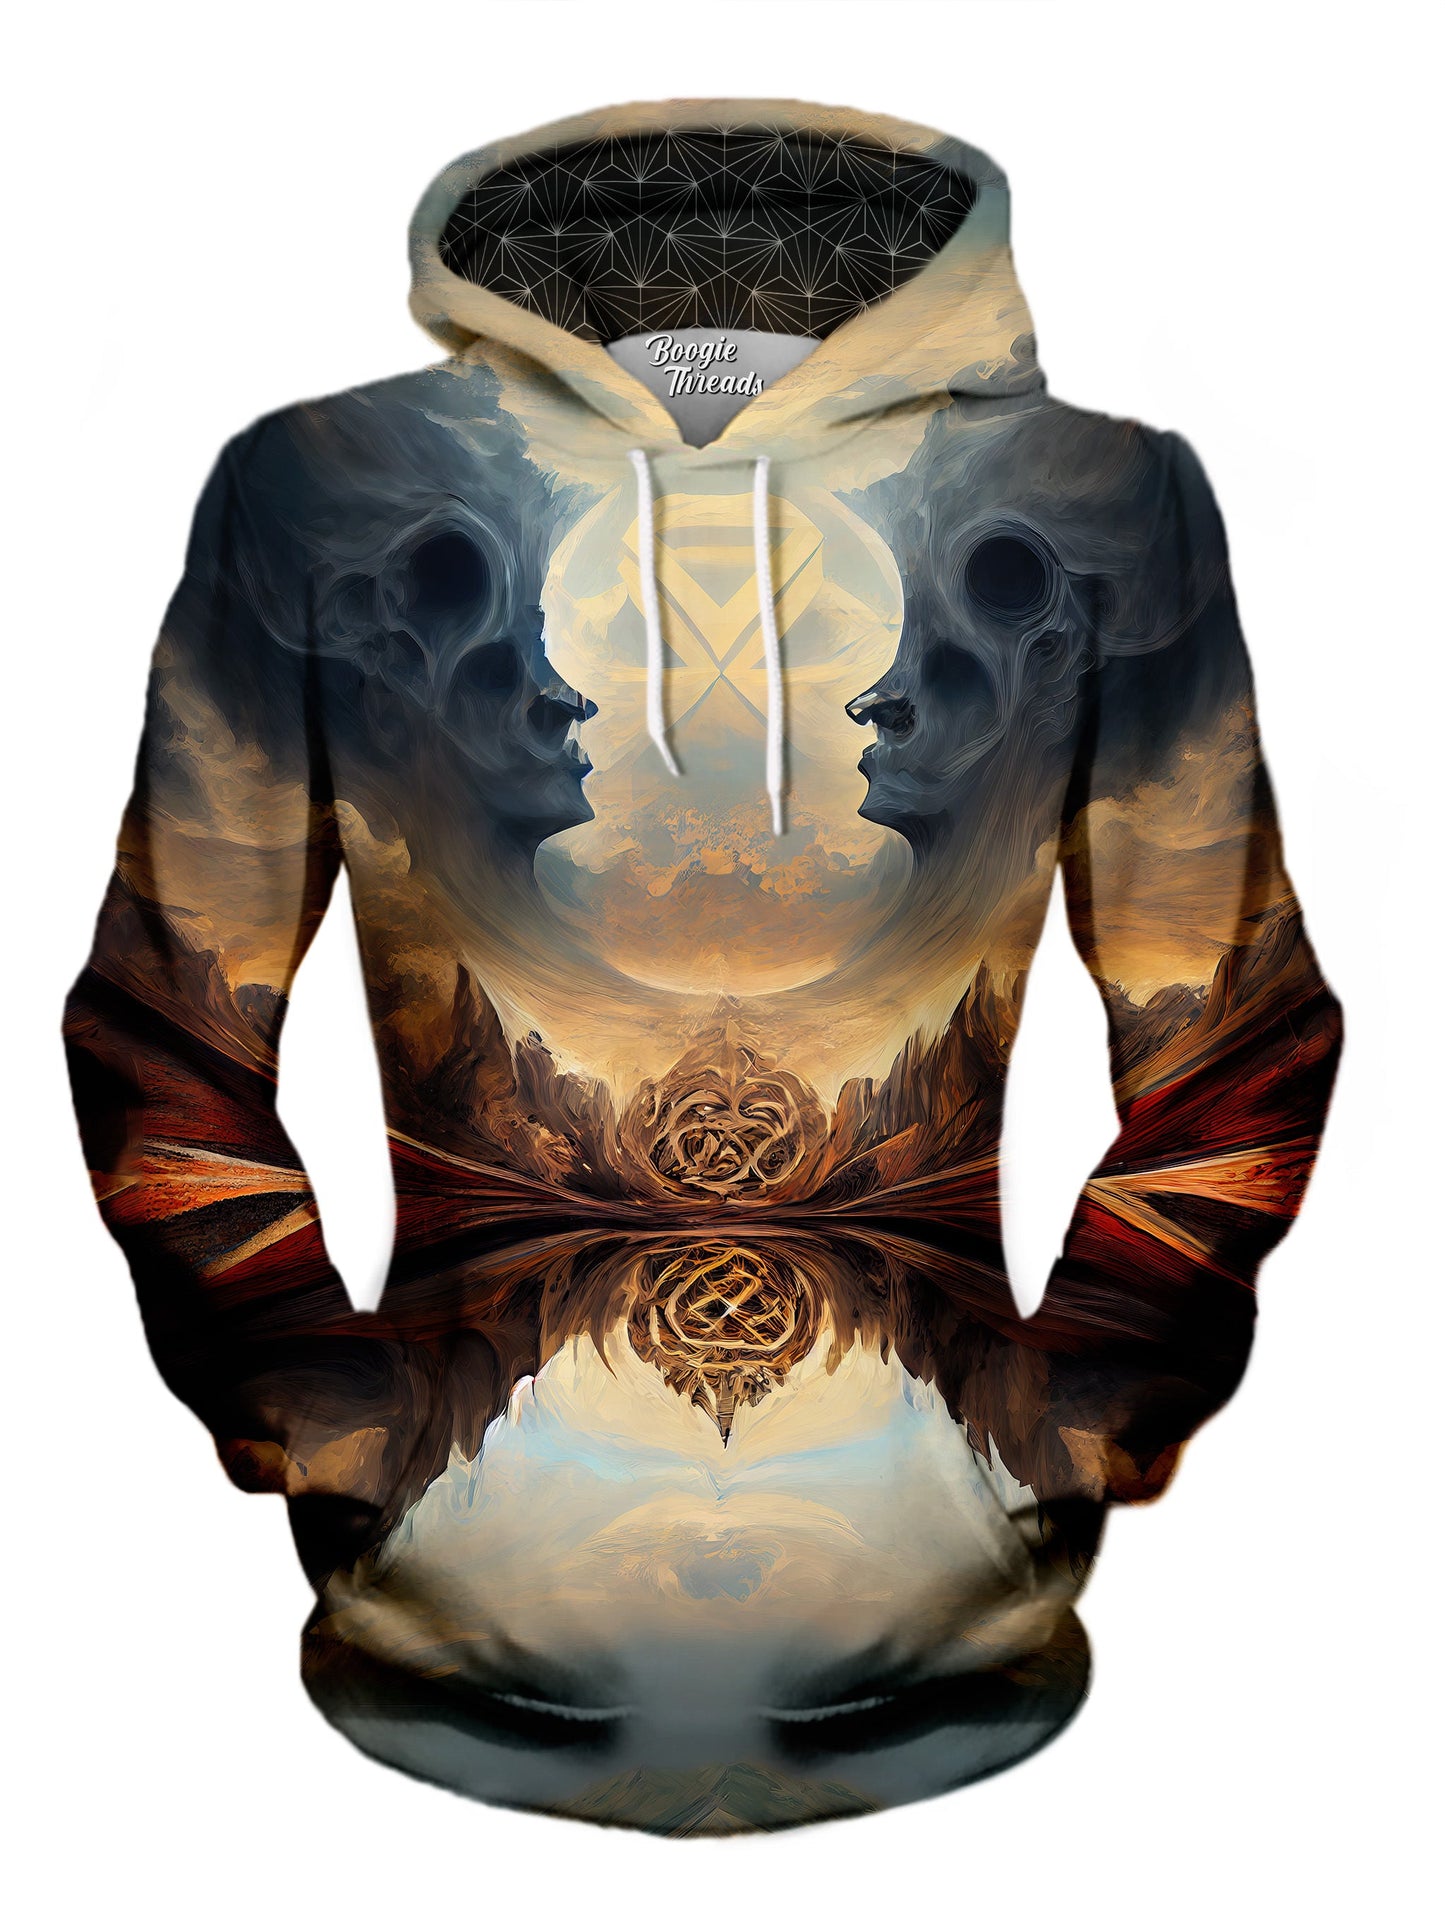 Exclusive Romance Unisex Pullover Hoodie - EDM Festival Clothing - Boogie Threads